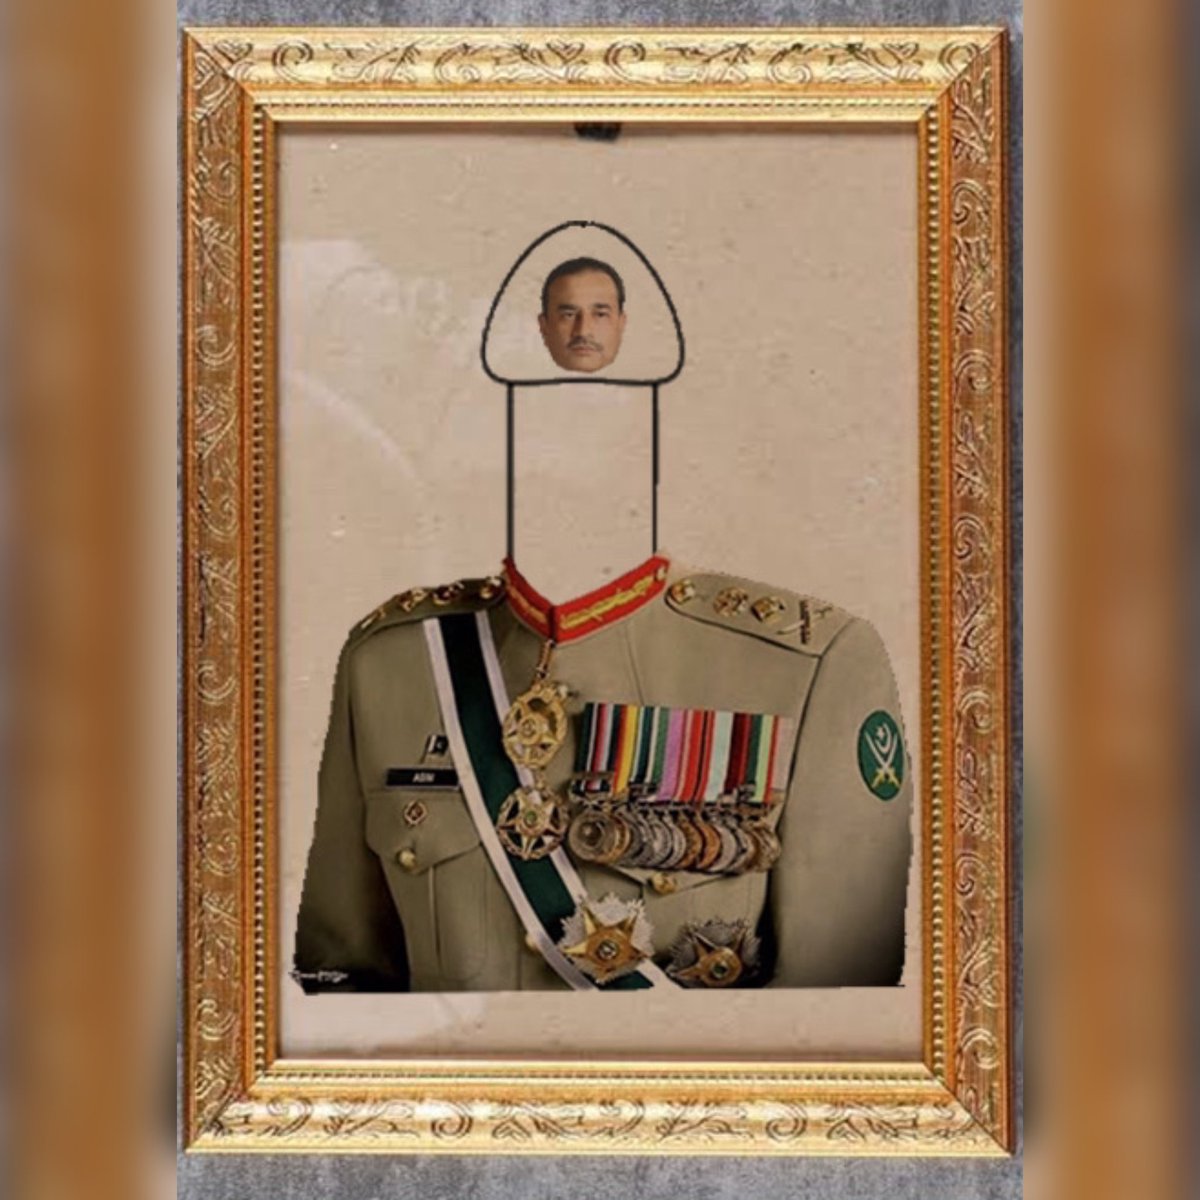 Rawalpindi, 7 May 2024: Pakistan Army is issuing commemorative portrait of the Chief Architect ahead on the first anniversary of 9th May tragedy.